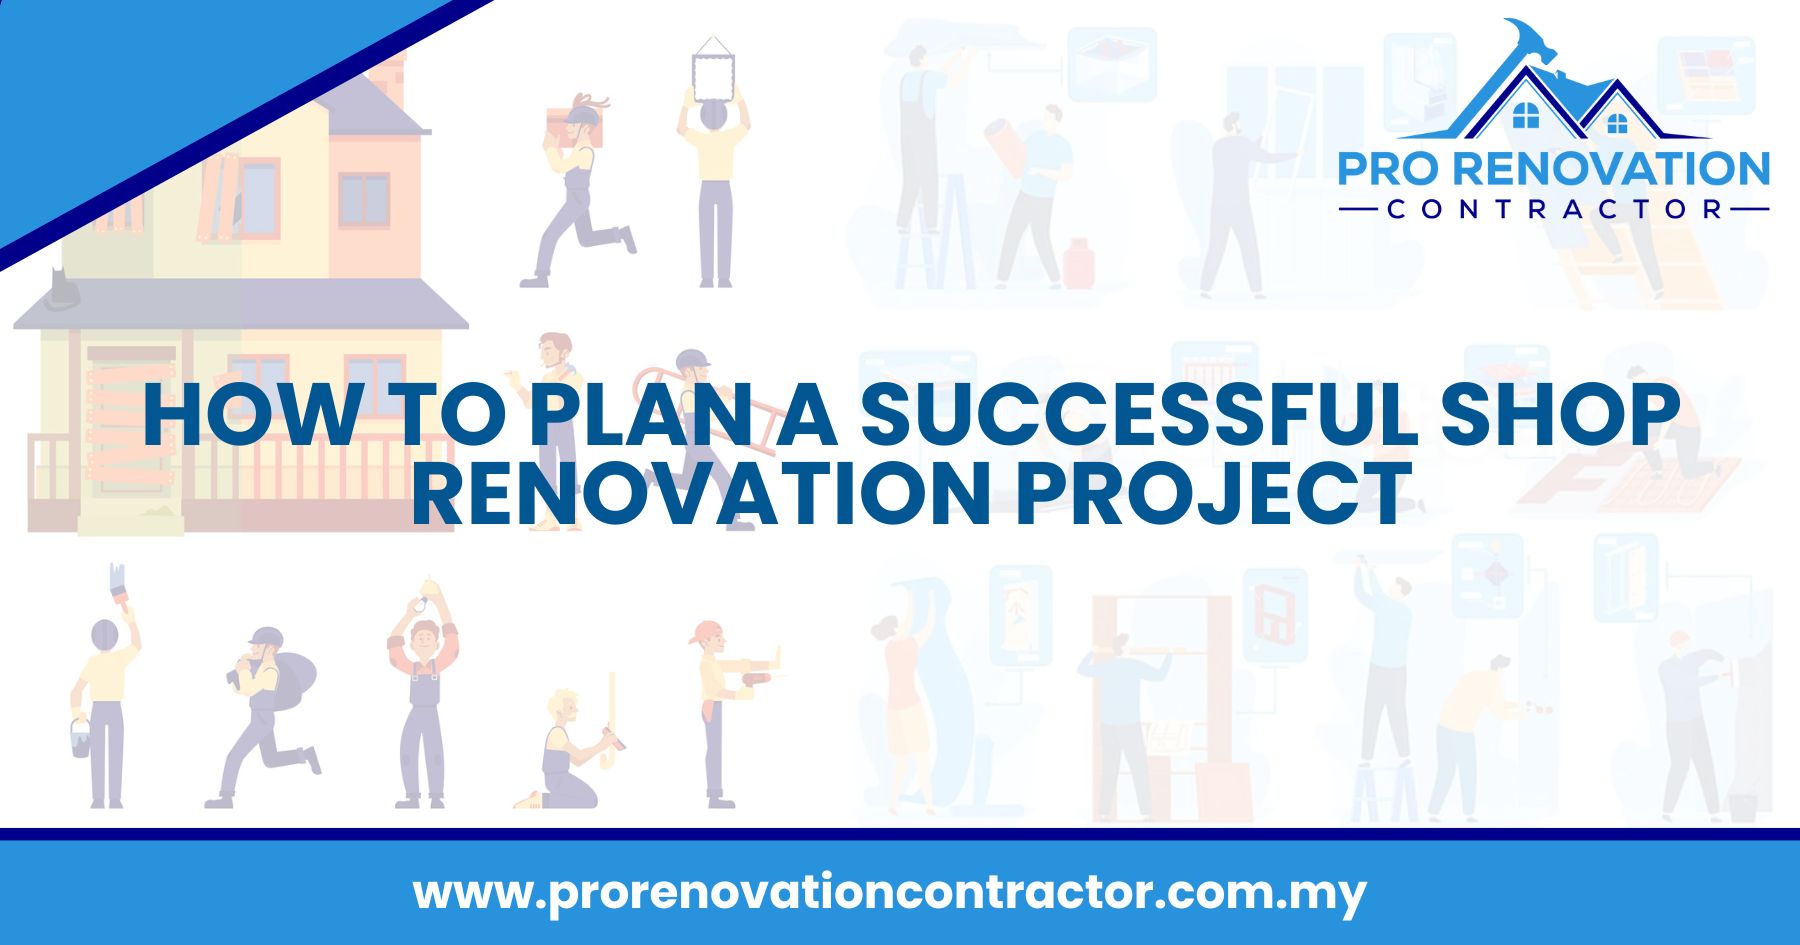 How To Plan A Successful Shop Renovation Project